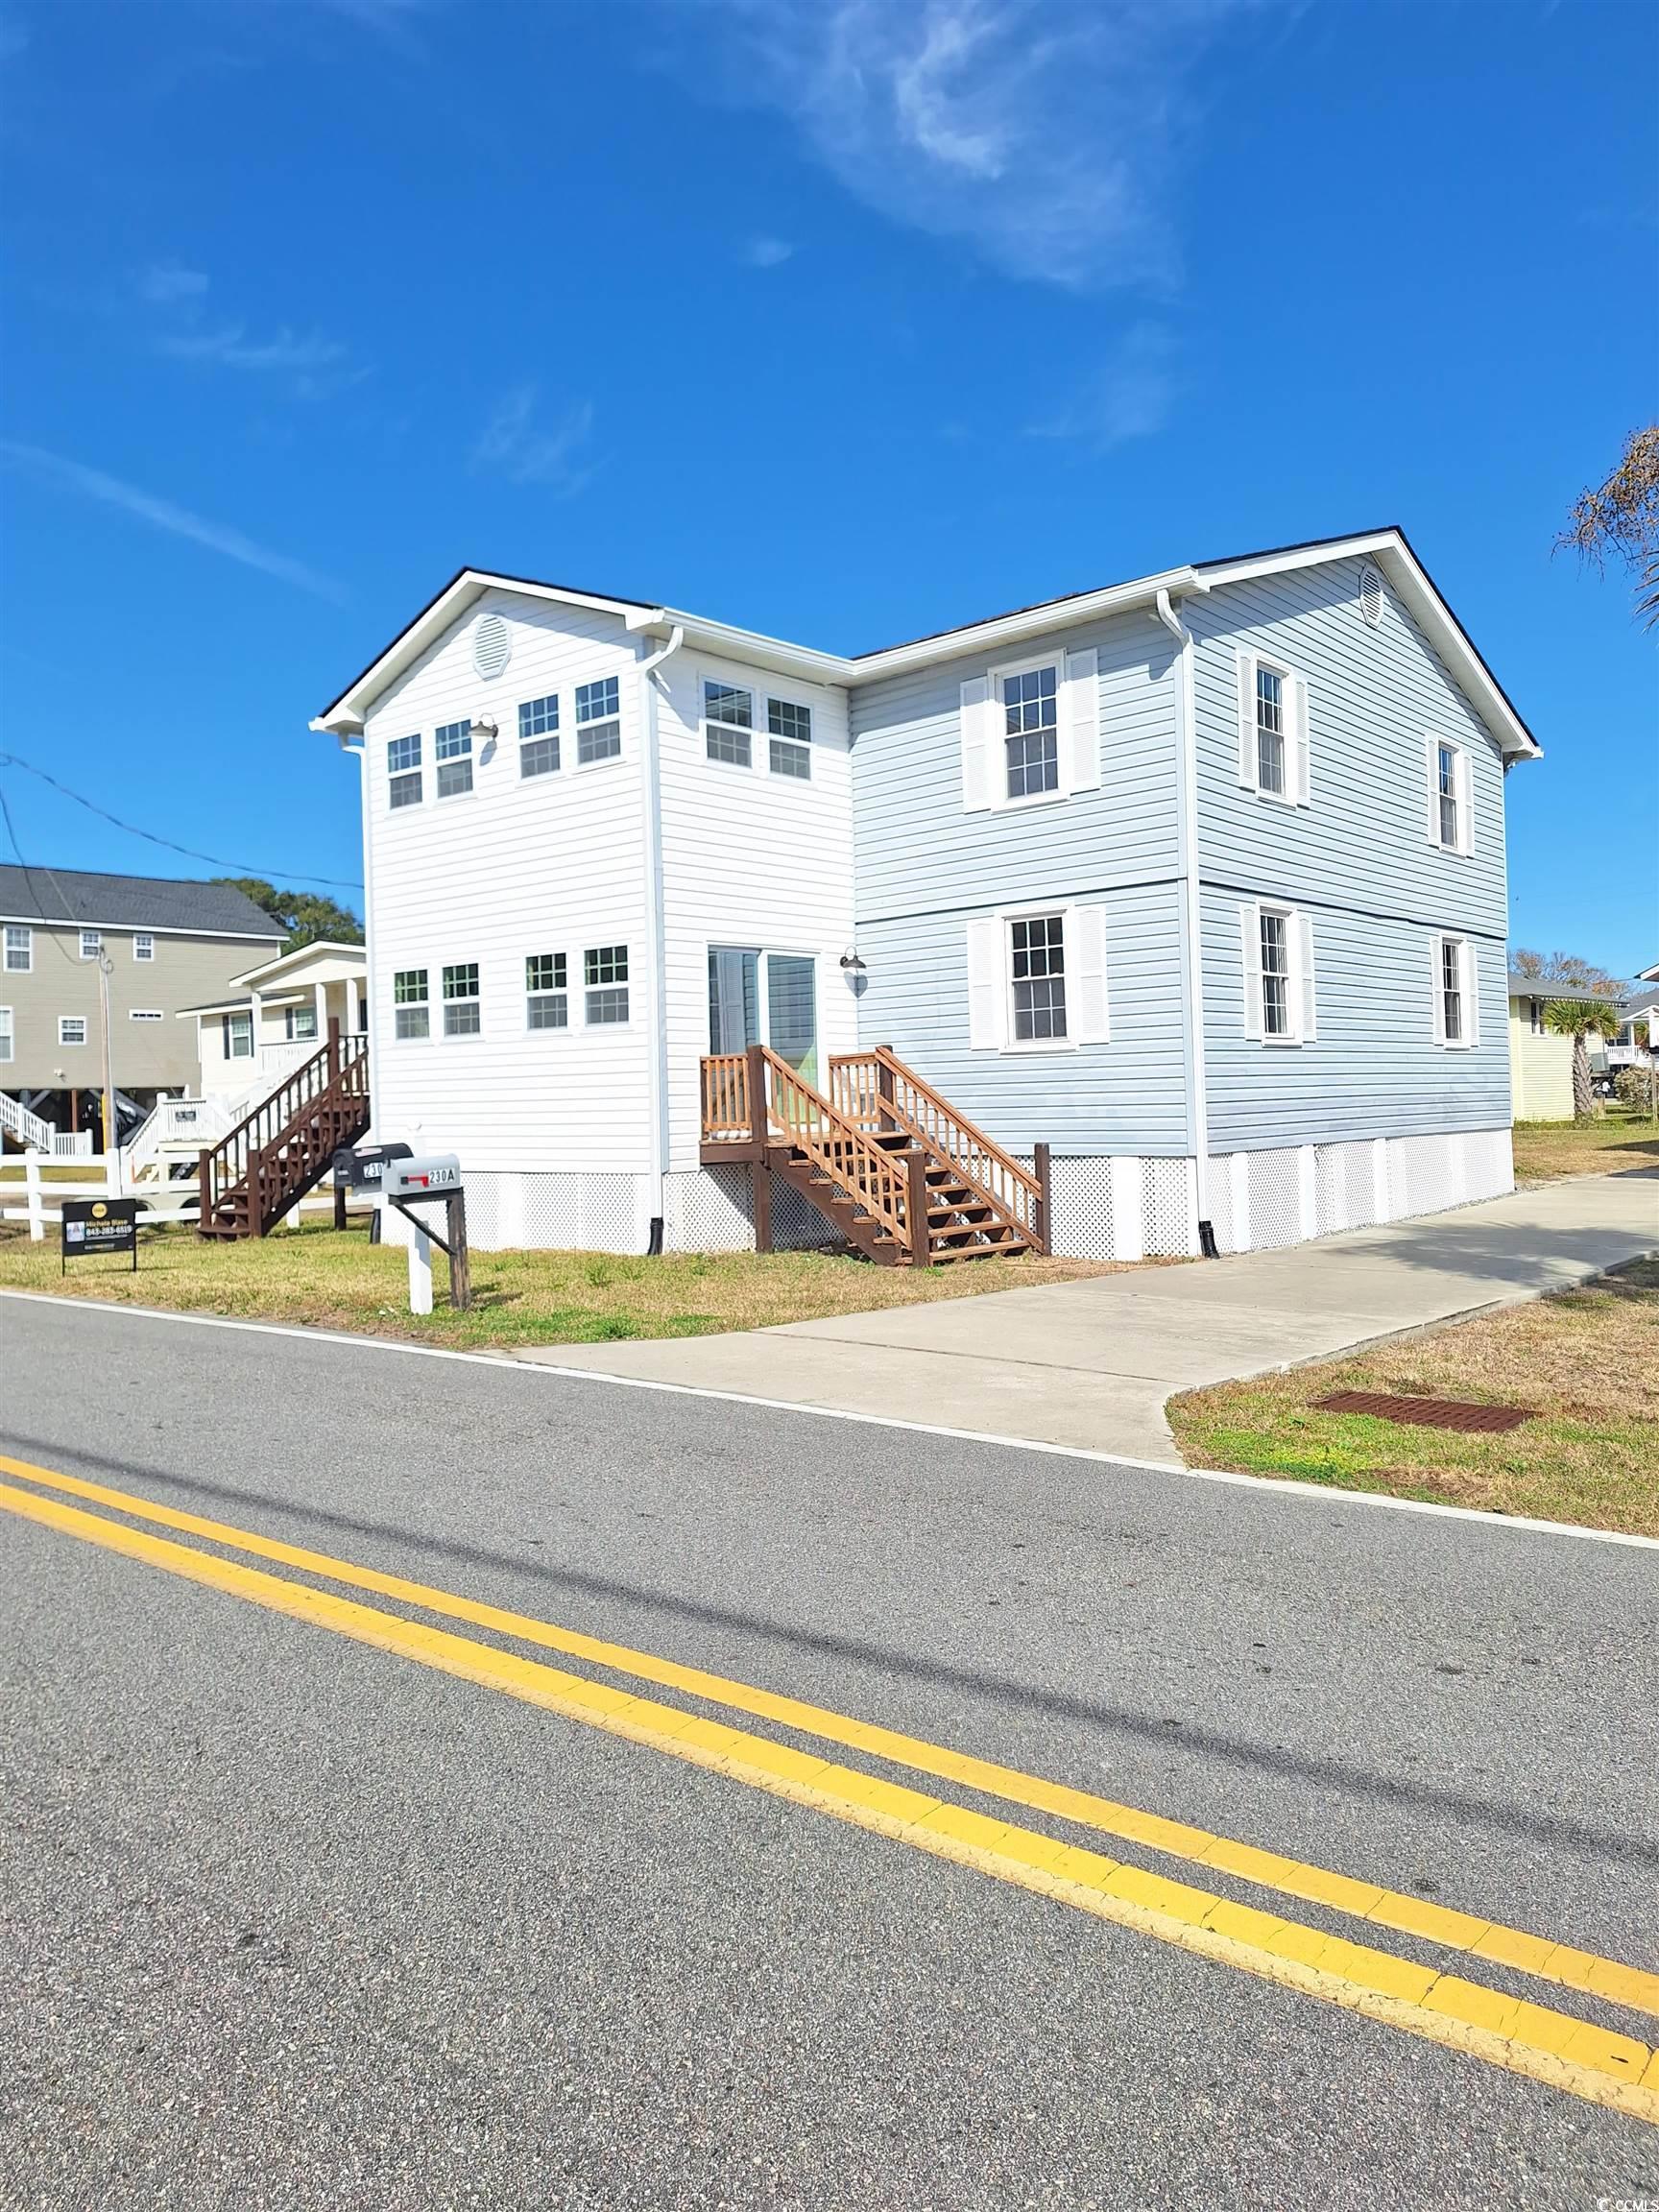 duplex-3/2 each unit!= 6 bdrm 4 bath-plenty of room for a pool and ample parking new fha guidelines allows 5% down on a duplex now!!! nicely remodeled 6 br/4 ba duplex located in murrells inlet walking distance to the beach. this vista drive property is the 12th home from the ocean! this is an up and down duplex. each unit has 3 brs and 2 ba. the two units are separate in that each unit is independently accessed from the exterior and the two units do not have interior access to one another. home would make a great rental property or live in one unit and rent the other unit!!! no hoa! walk to the beach!! new hvac upstairs and downstairs only 1 year ..new-roof is only 2 years old-all new stainless appliances on both levels, new gutters, new french drains, new flooring and ceilings scraped close to murrells inlet marshwalk and all myrtle beach has to offer weekly vacation rentals allowed!